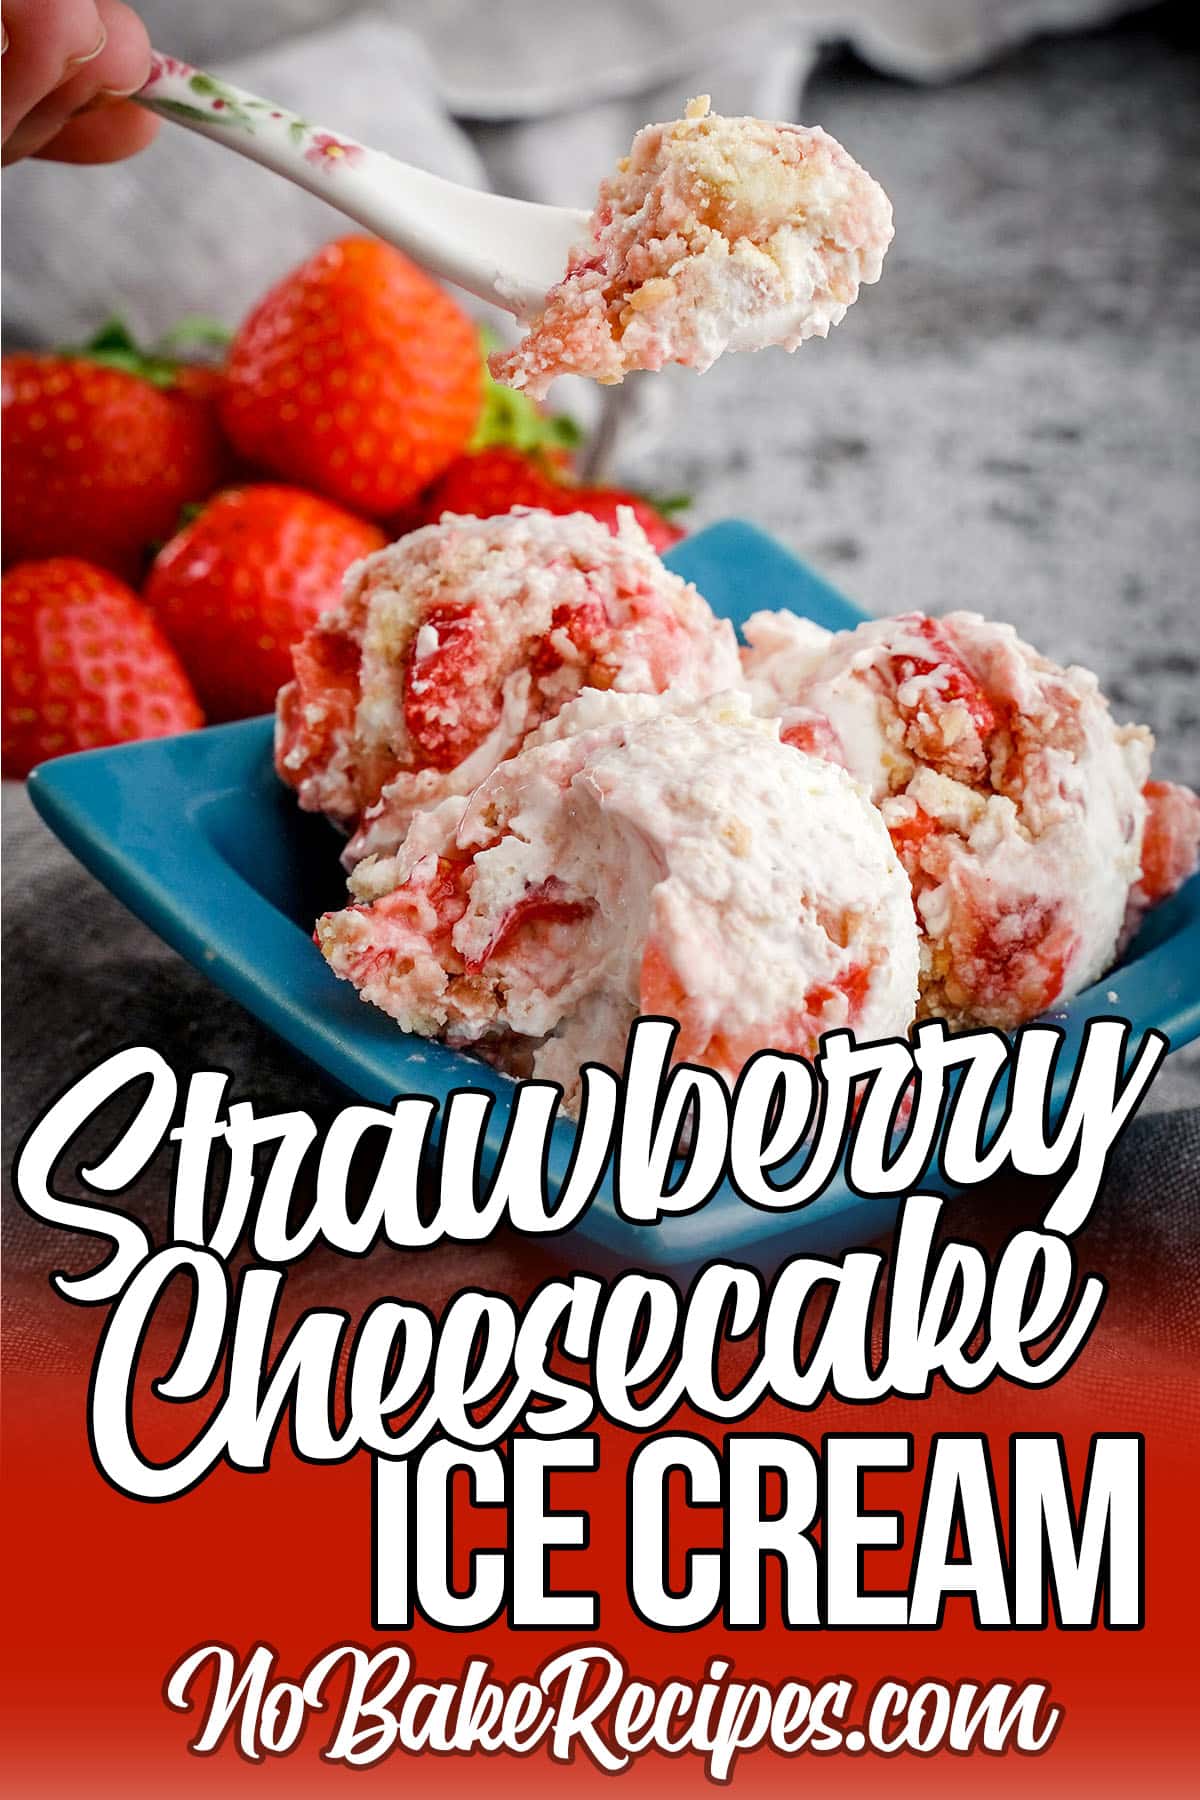 strawberry ice cream with cheesecake in a bowl with text which reads strawberry cheesecake ice cream